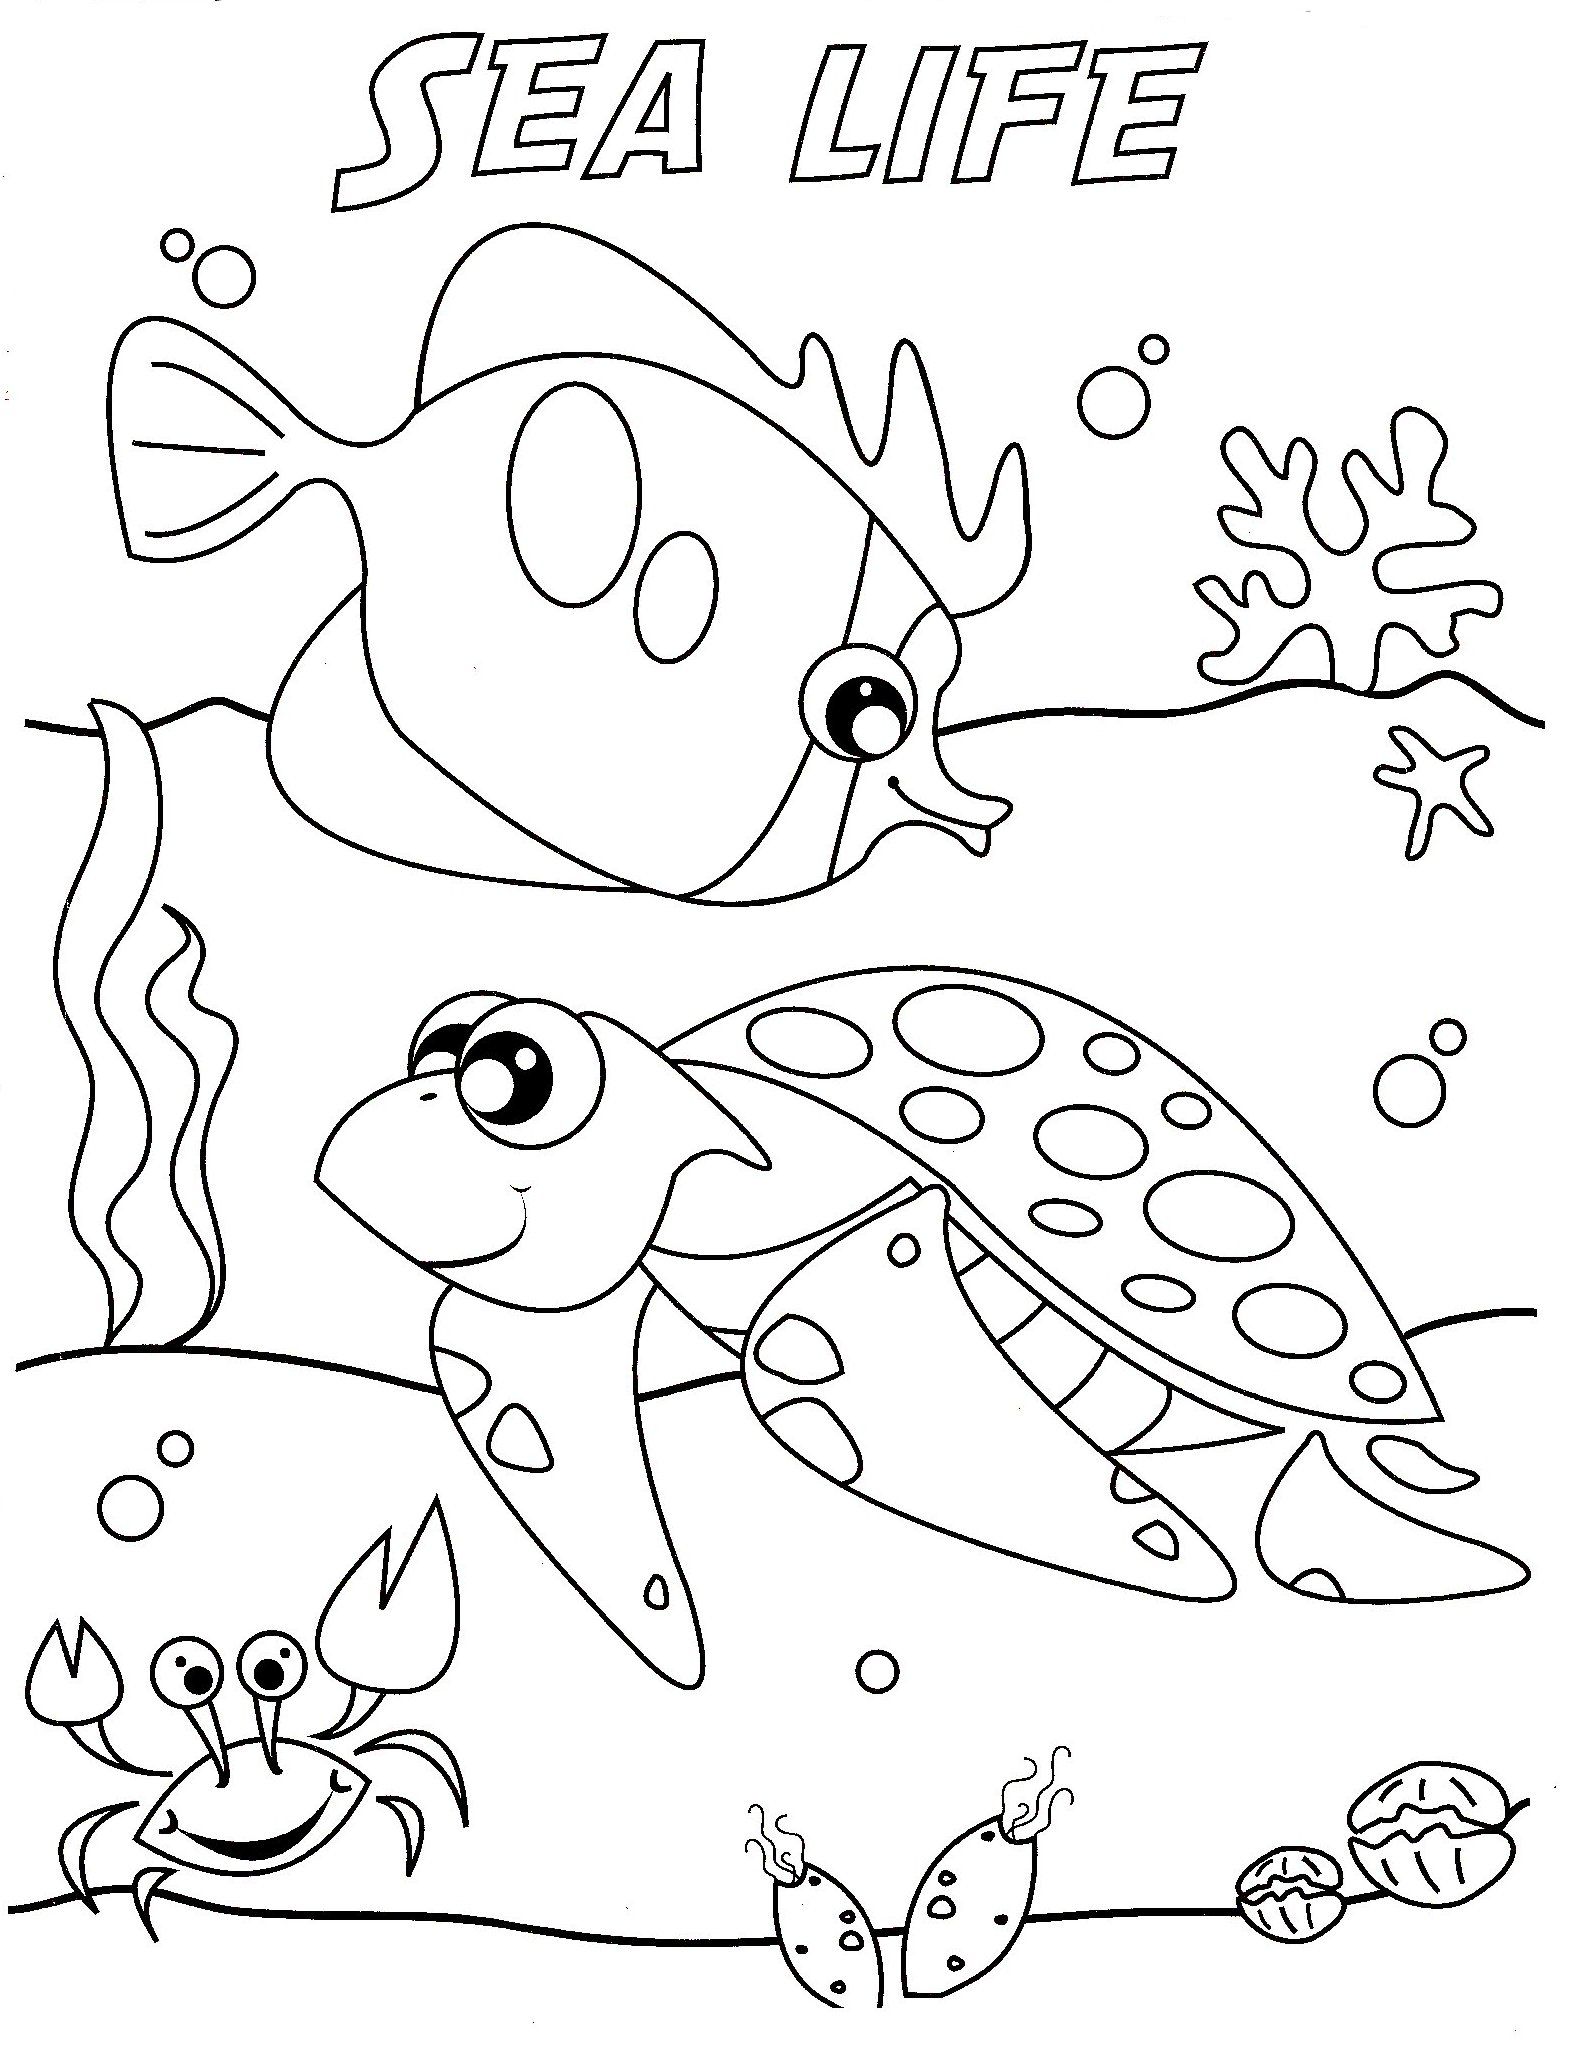 Ocean Waves Coloring Pages, coloring pages of ocean waves coloring ...